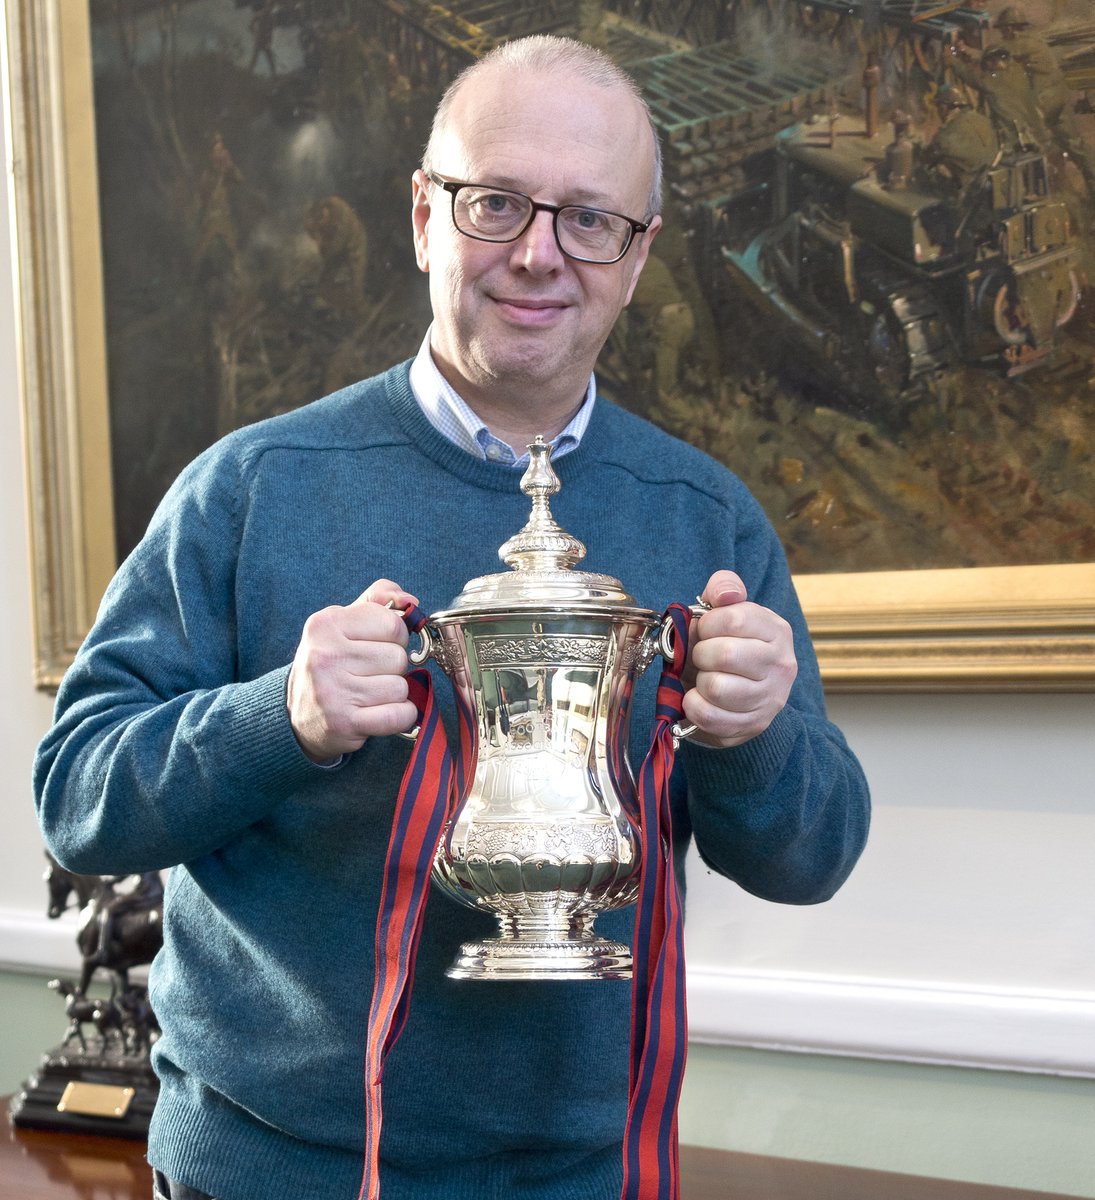  #FACupMemories Series 1, No. 10Today's exclusive  #FACup   memories are provided by someone who may be unfamiliar to you, but who's work you should definitely get to know, a quality photo-essayist focused on  #NonLeague & Amateur FootballDavid Bauckham https://facupfactfile.wordpress.com/2020/05/10/fa-cup-memories-series-110-david-bauckham/